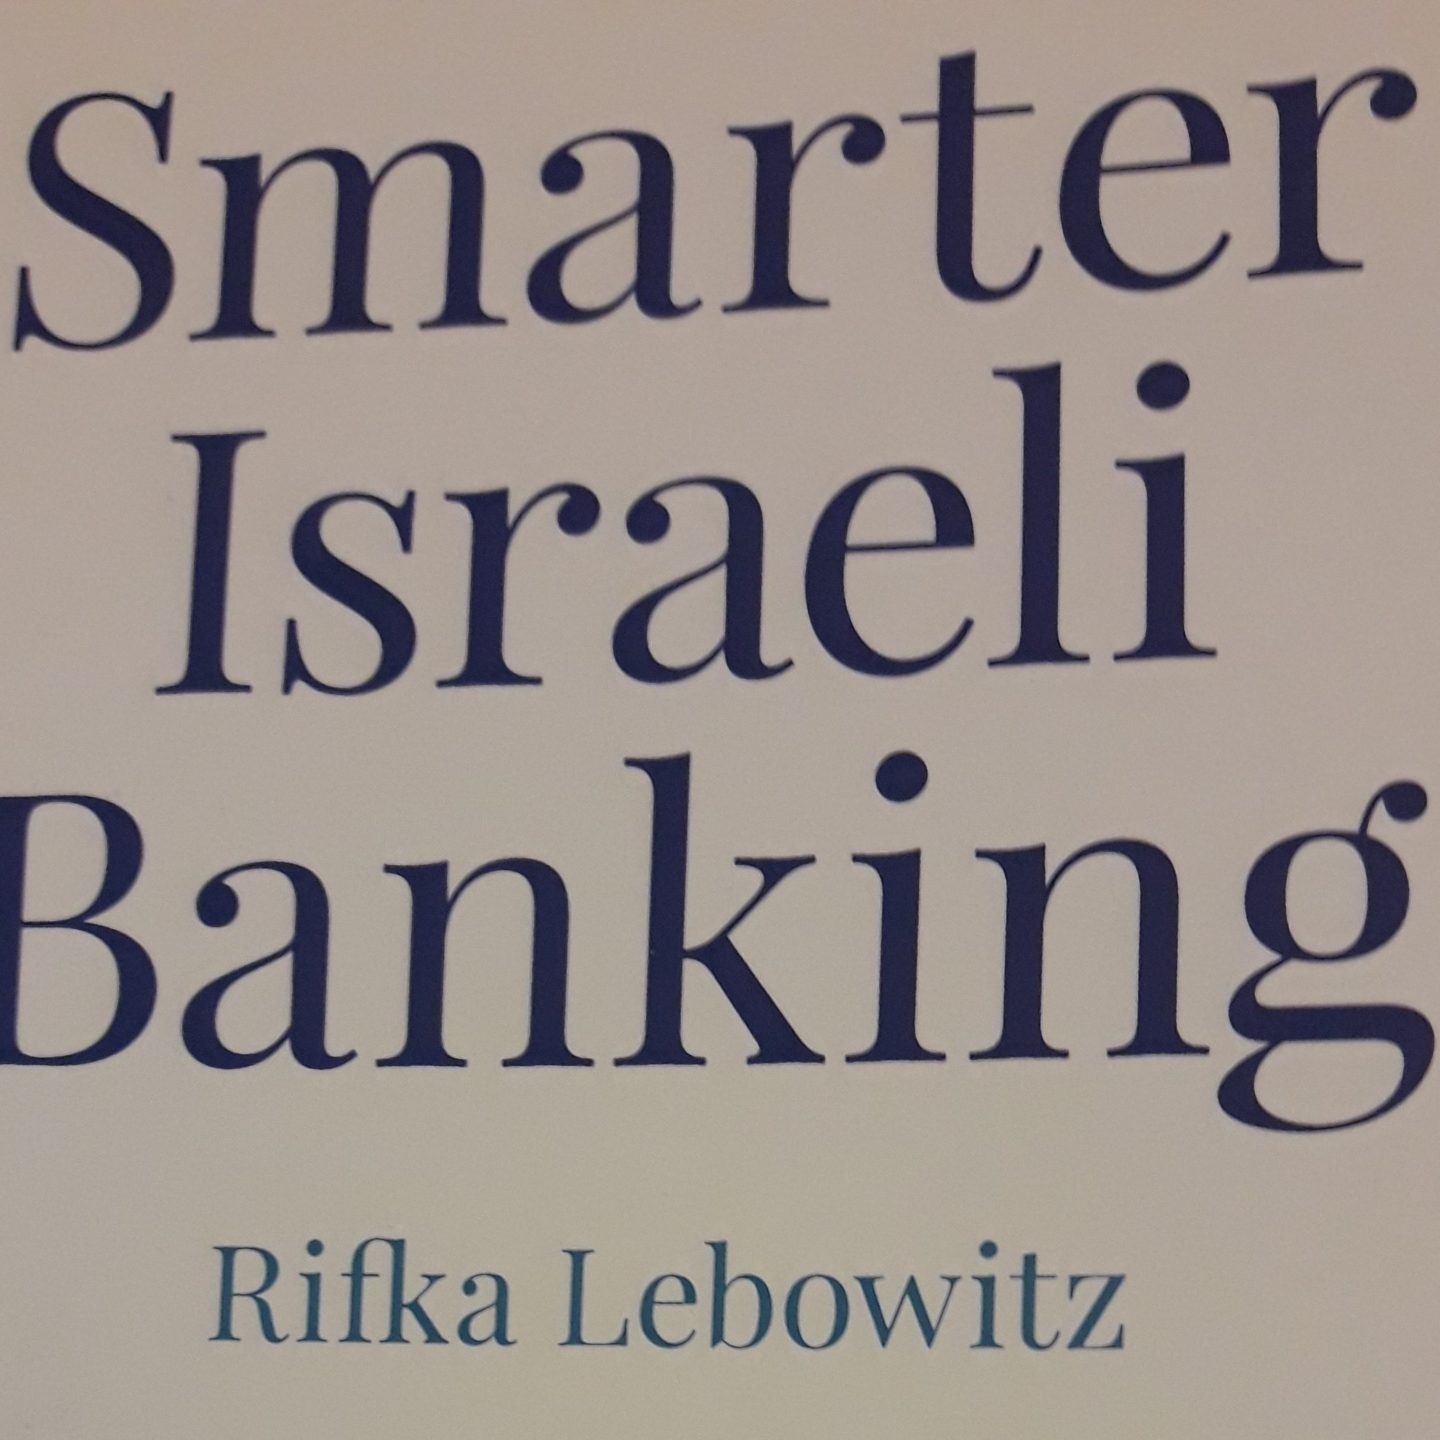 Guide to Israeli Banking